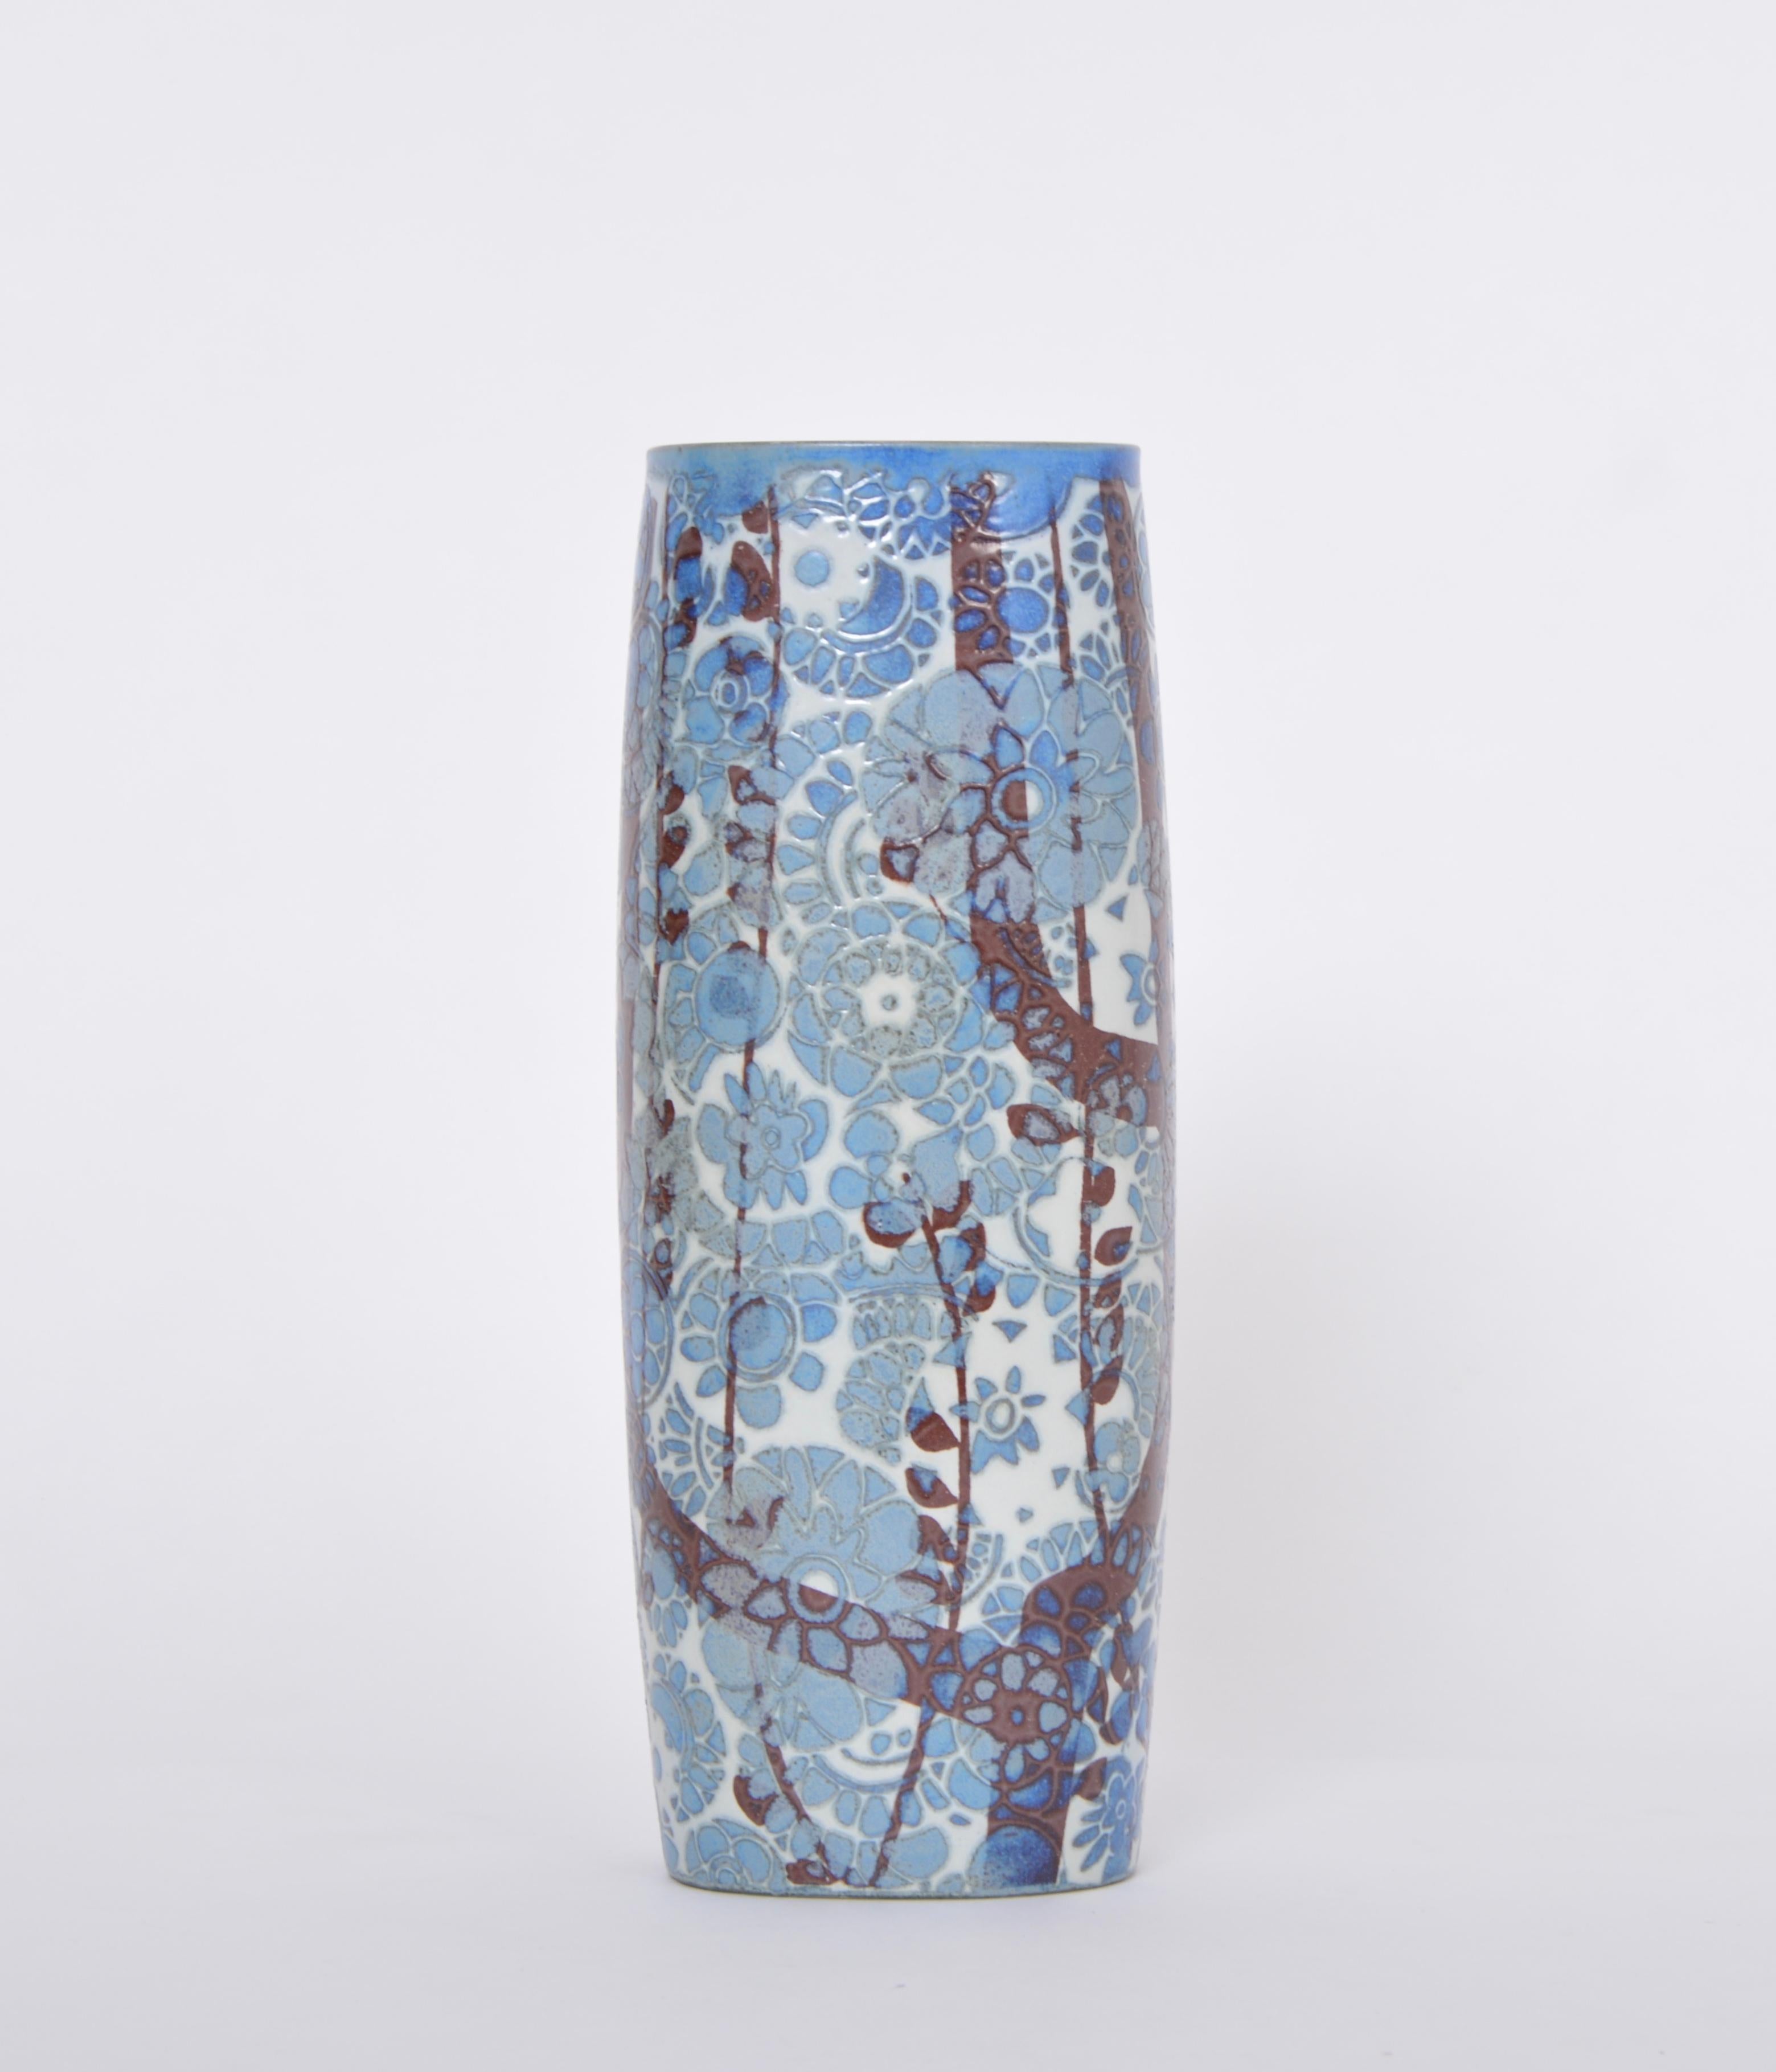 Tall Danish midcentury BACA Vase by Johanne Gerber for Royal Copenhagen 
This vase's decor was designed by Johanne Gerber for Royal Copenhagen. It features a beautiful pattern made of flowers and branches in blue and black. 
The vase is in very